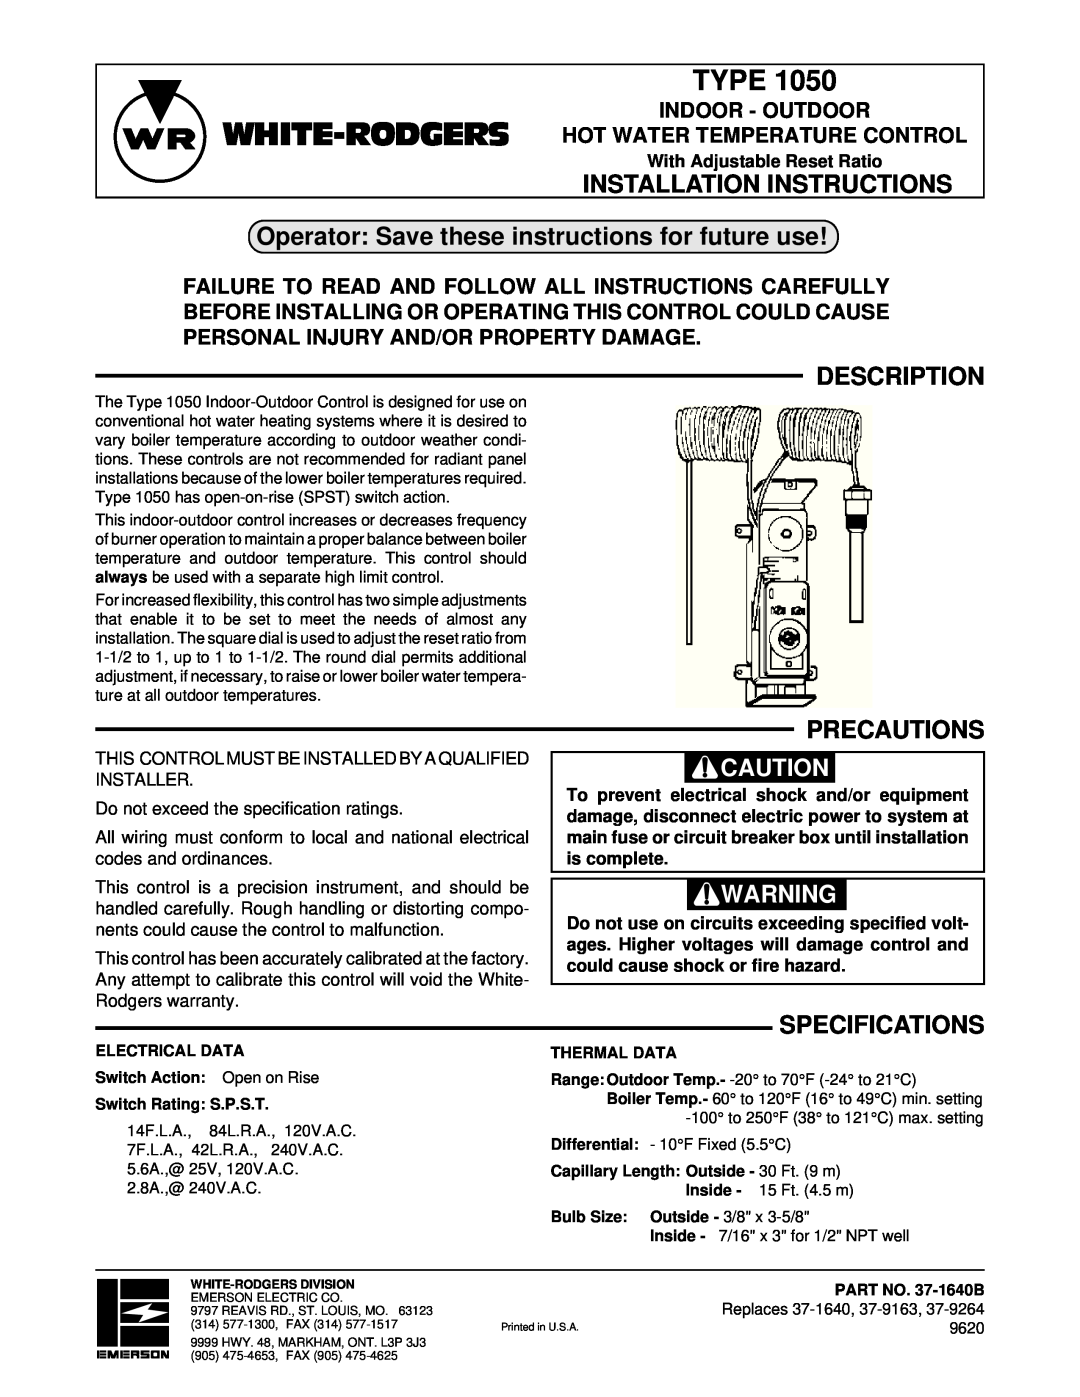 White Rodgers 1050 installation instructions Type, Installation Instructions, Description, Precautions, Specifications 